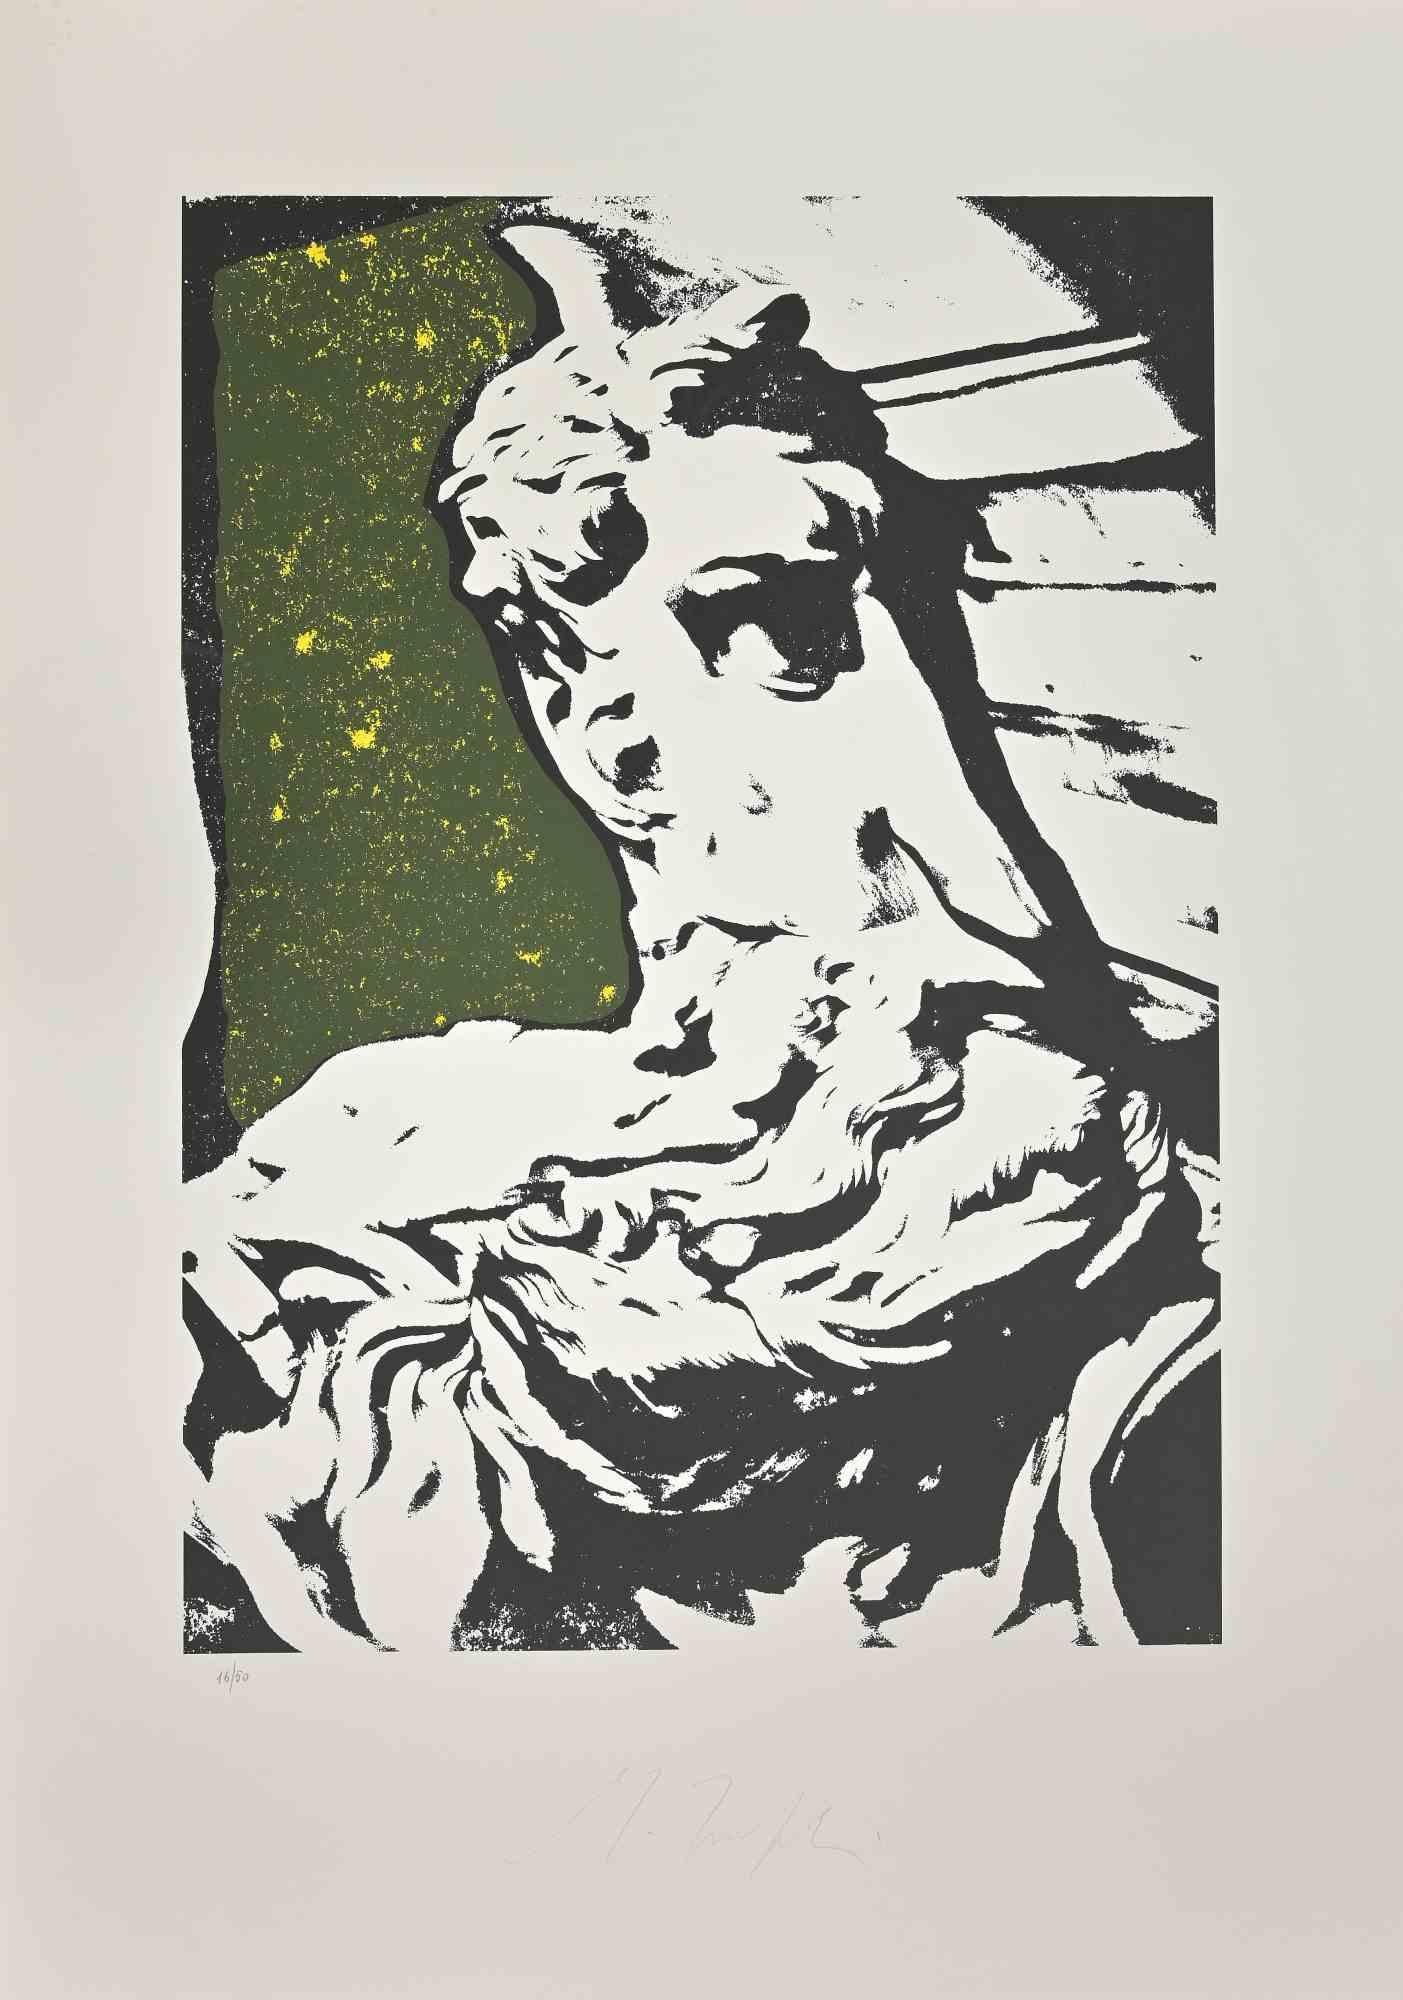 Composition is a Lithograph realized by Mino Trafeli in 1980s. 

Edition 16/50.

Hand signed.

Good conditions.

 

Mino Trafeli (Volterra, December 29, 1922 - Volterra, August 9, 2018) was an Italian sculptor and partisan.

Fundamental to his